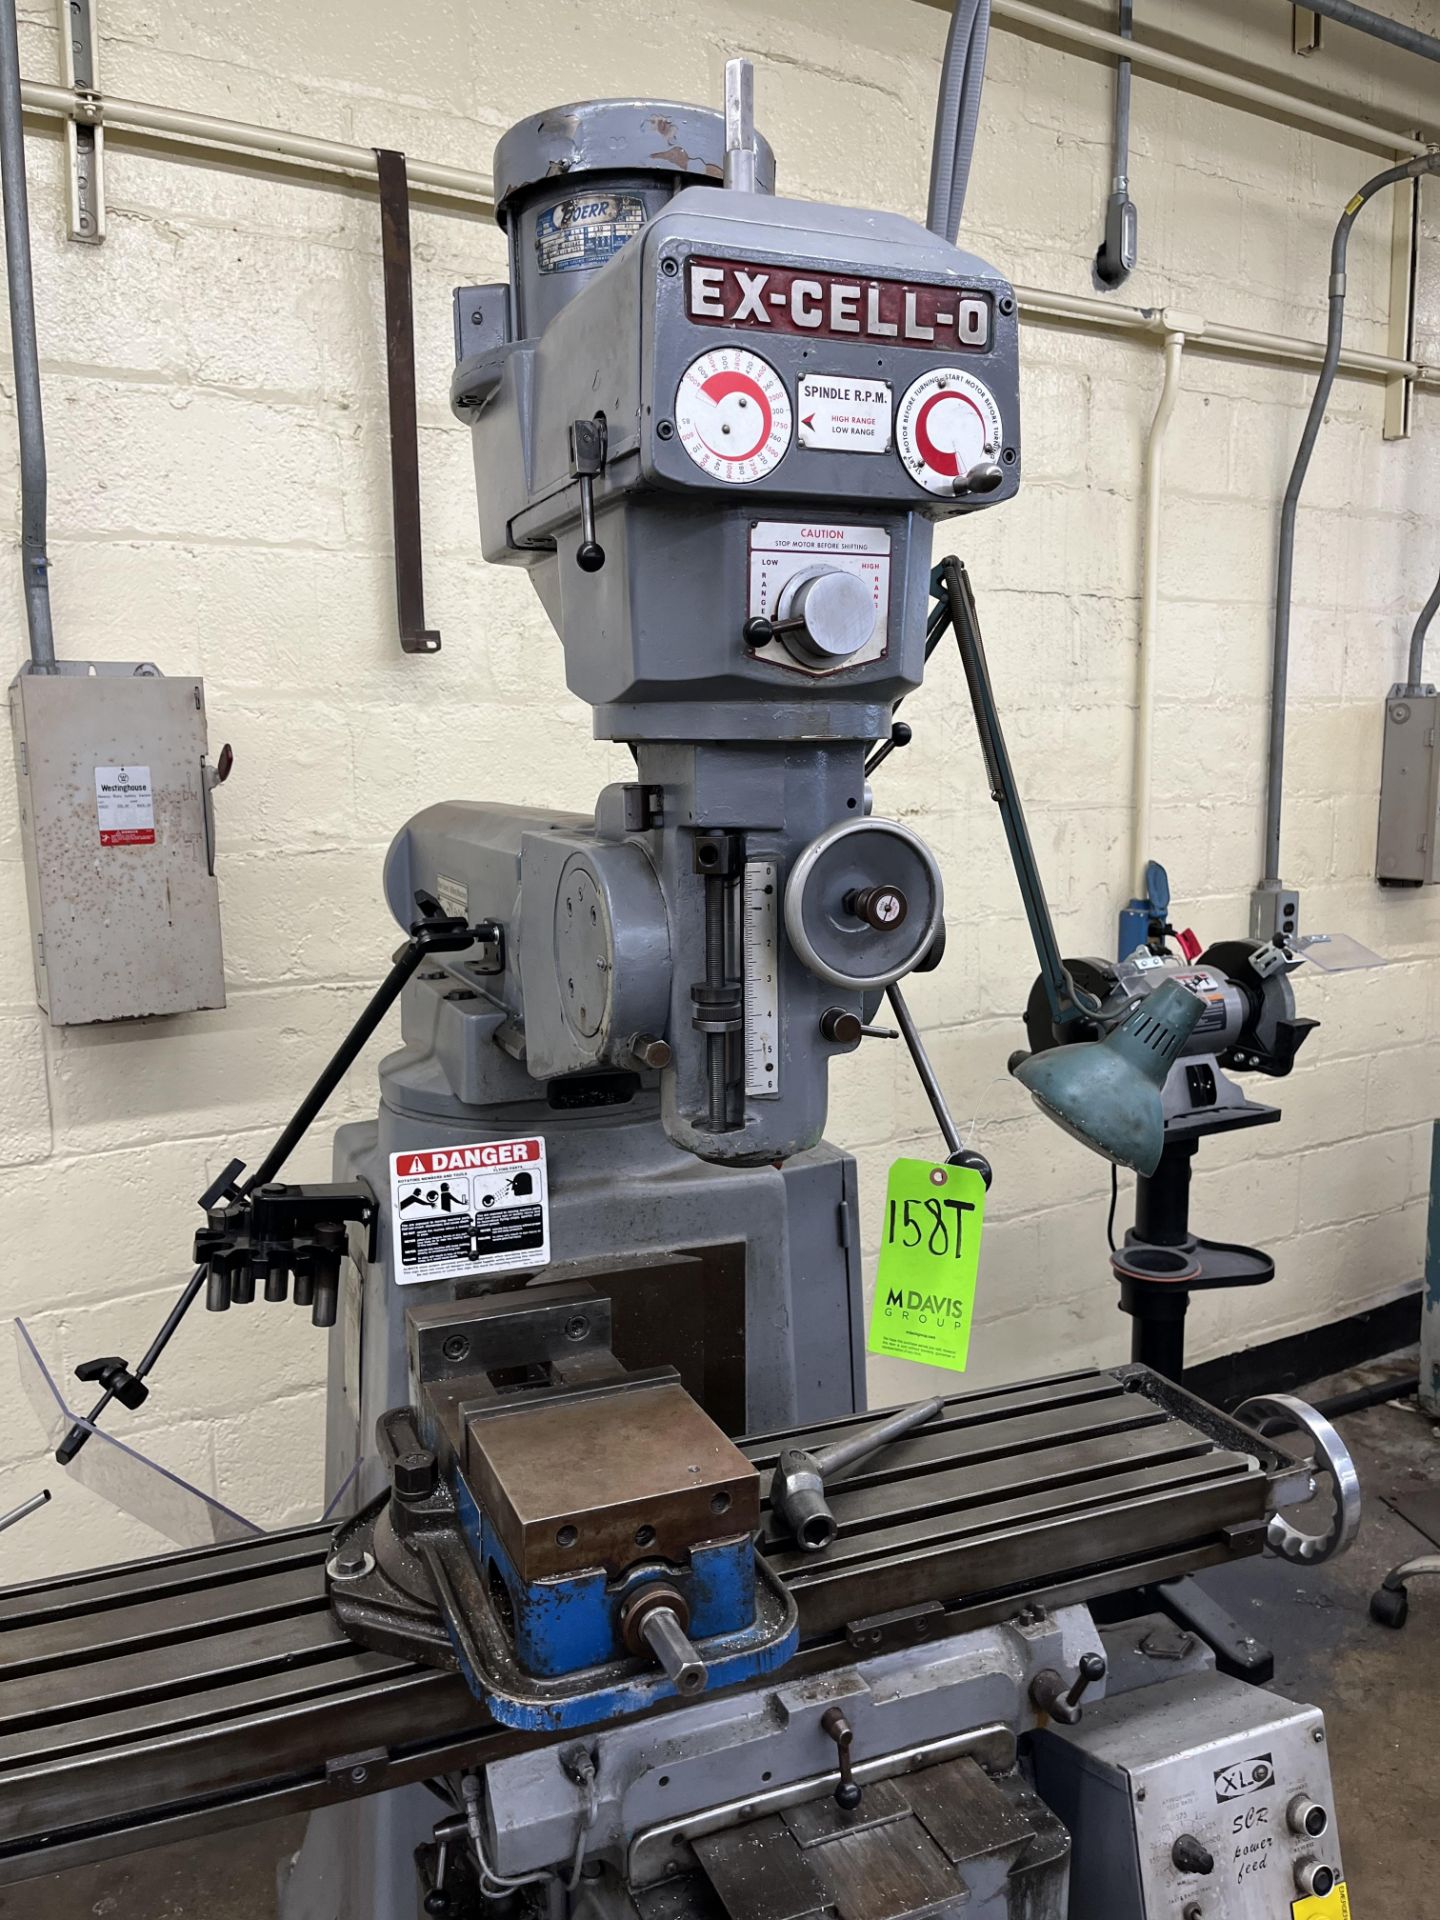 EX-CELL-O CORPORATION RAM TURRET MILLING MACHINE STYLE 602 SERIAL NO. 6026865 SPINDLE 460 VOLTS 2.